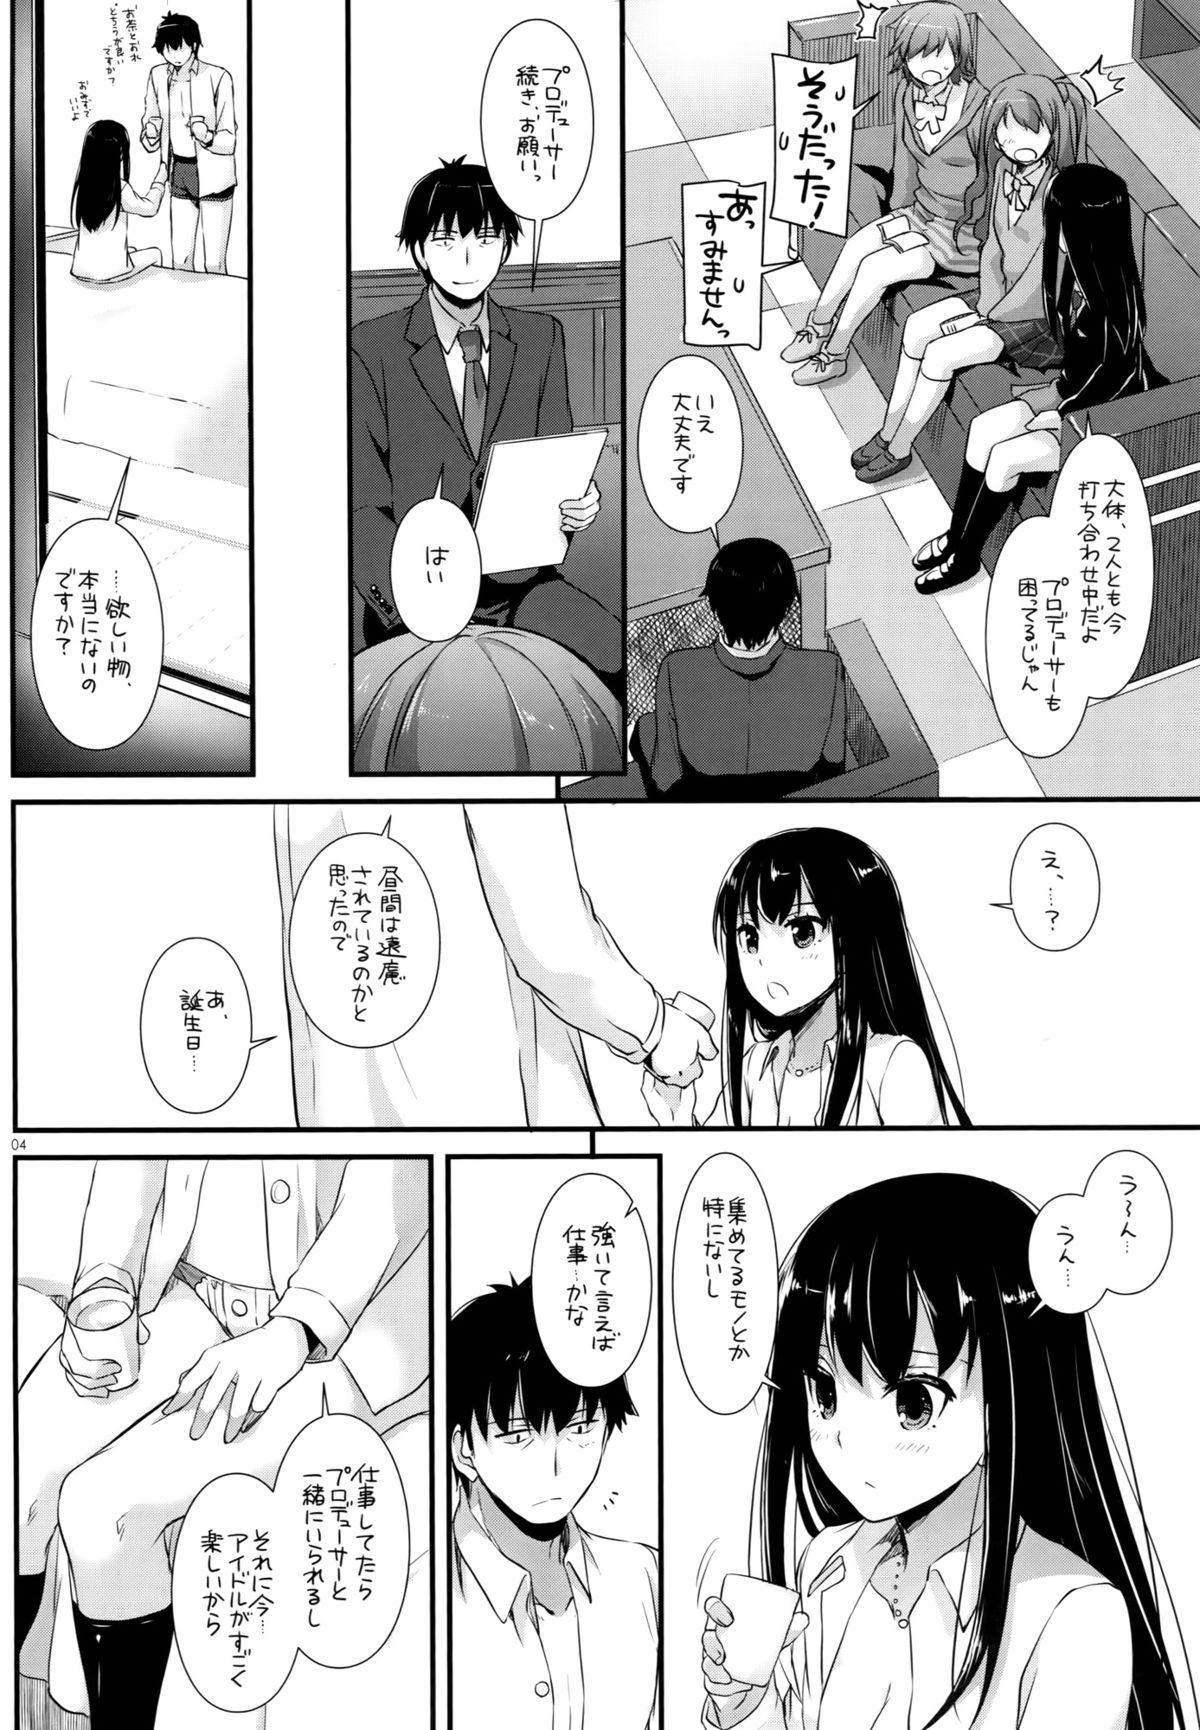 She D.L. action 102 - The idolmaster Toilet - Page 3